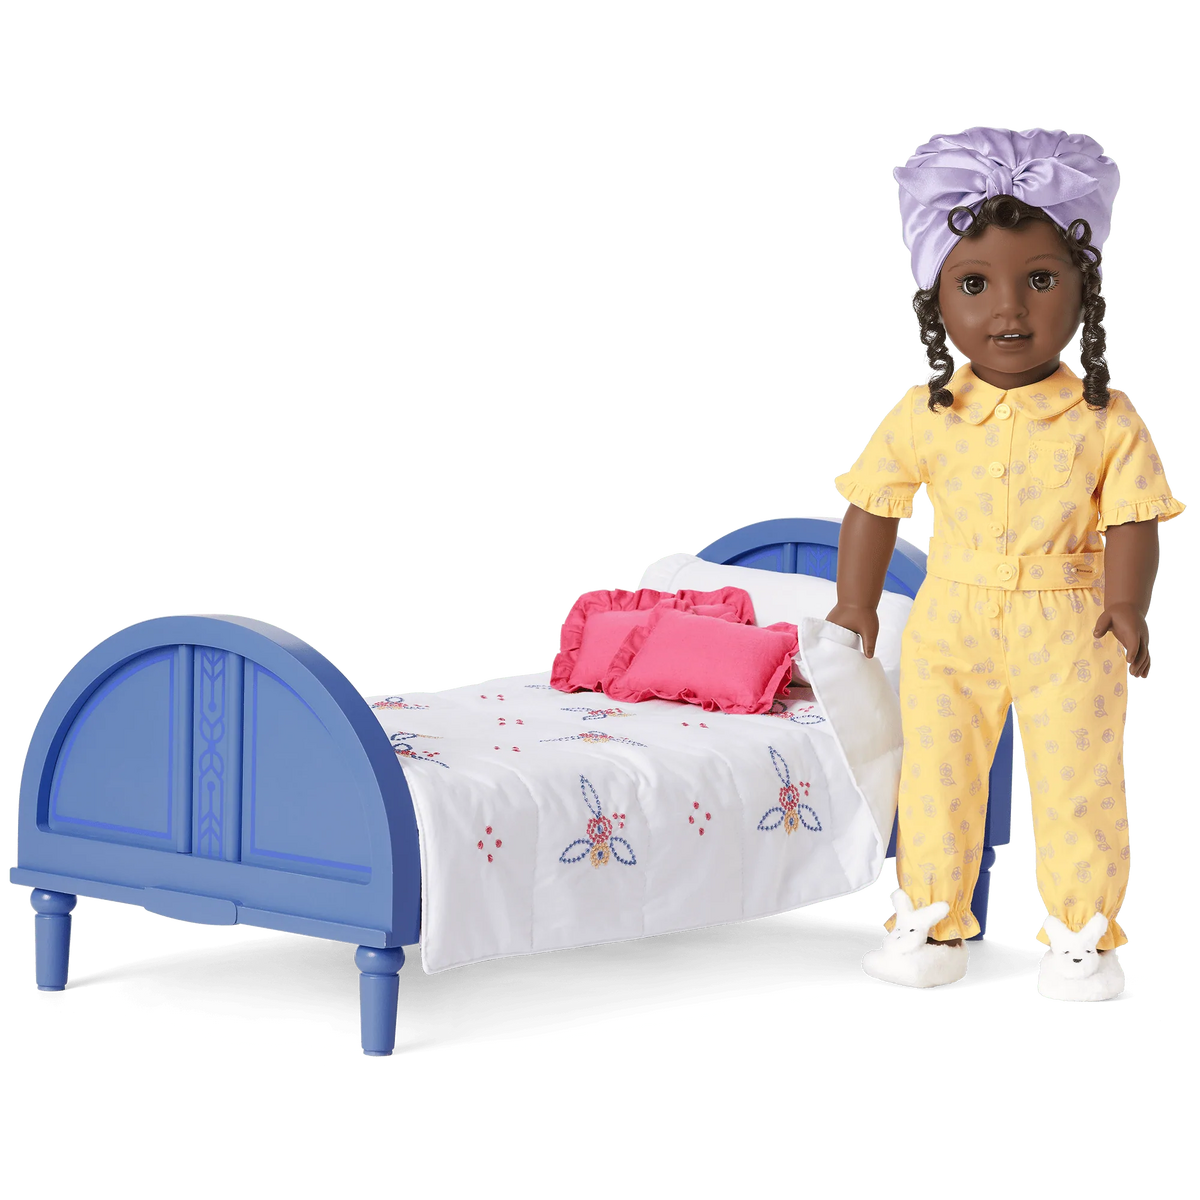 Samantha's Bed and Bedding, American Girl Wiki